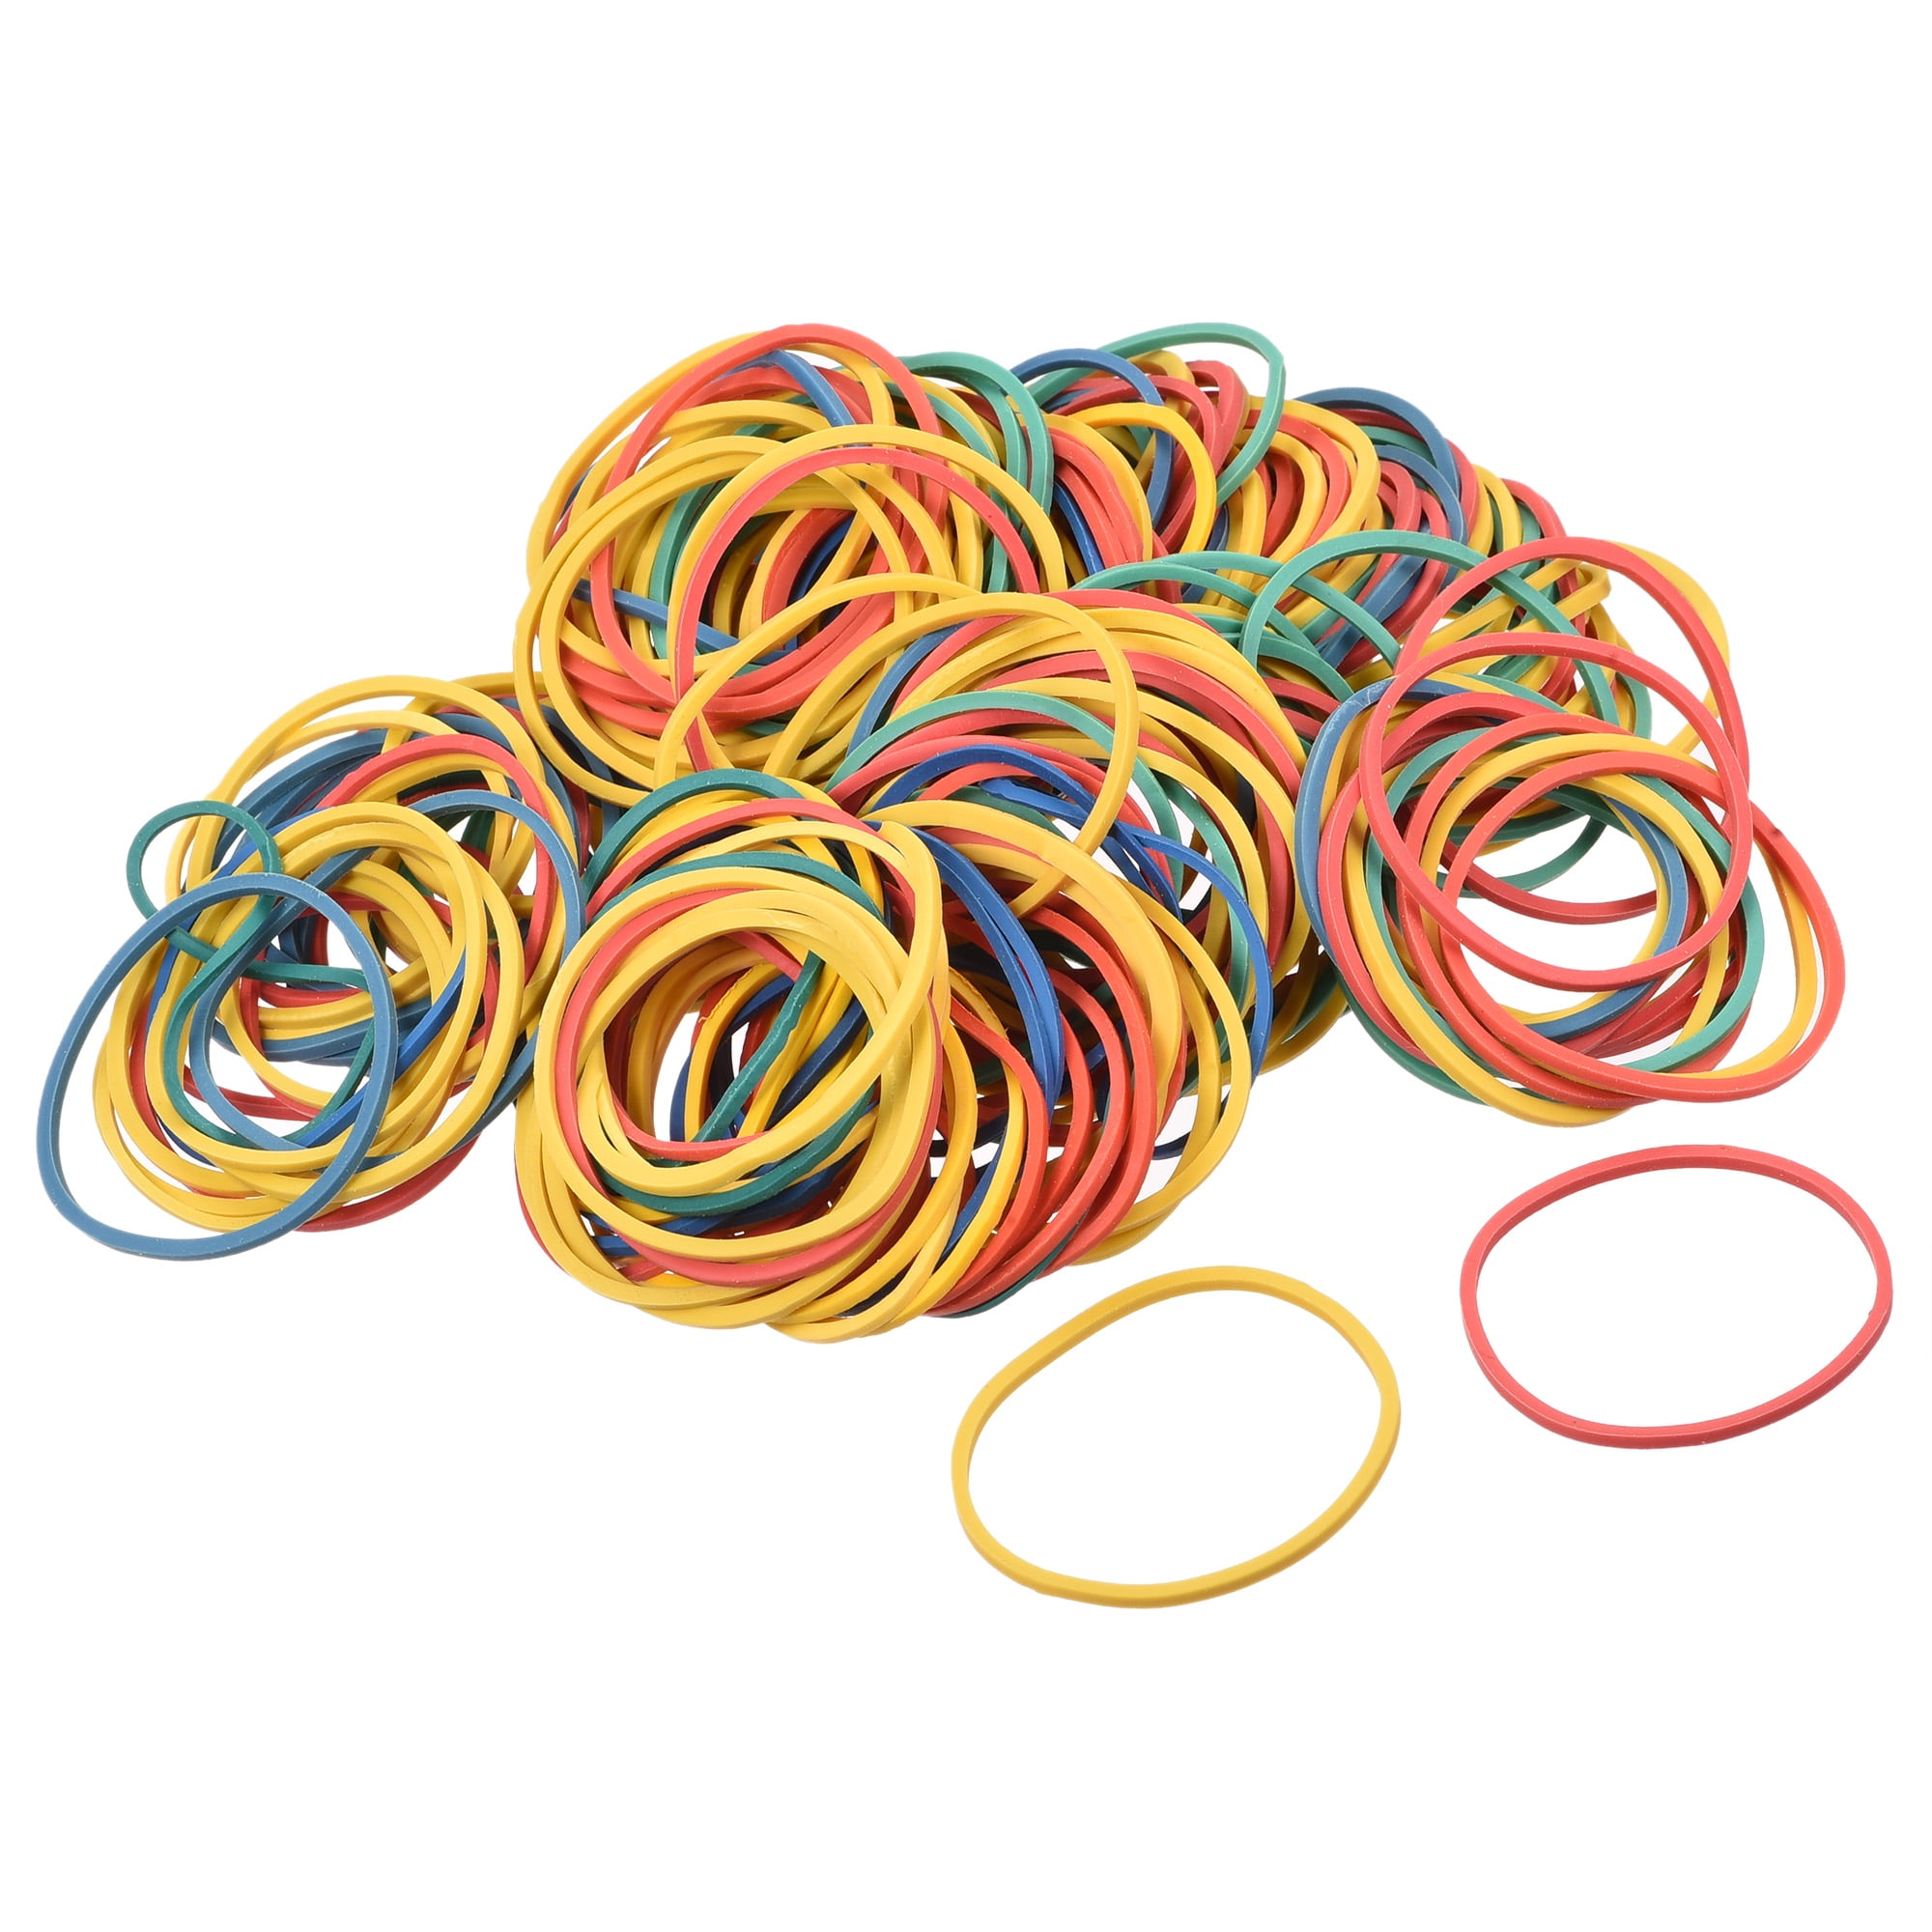 Elastic Rubber Bands Various Different Size 1.5mm Strong Thick -500g